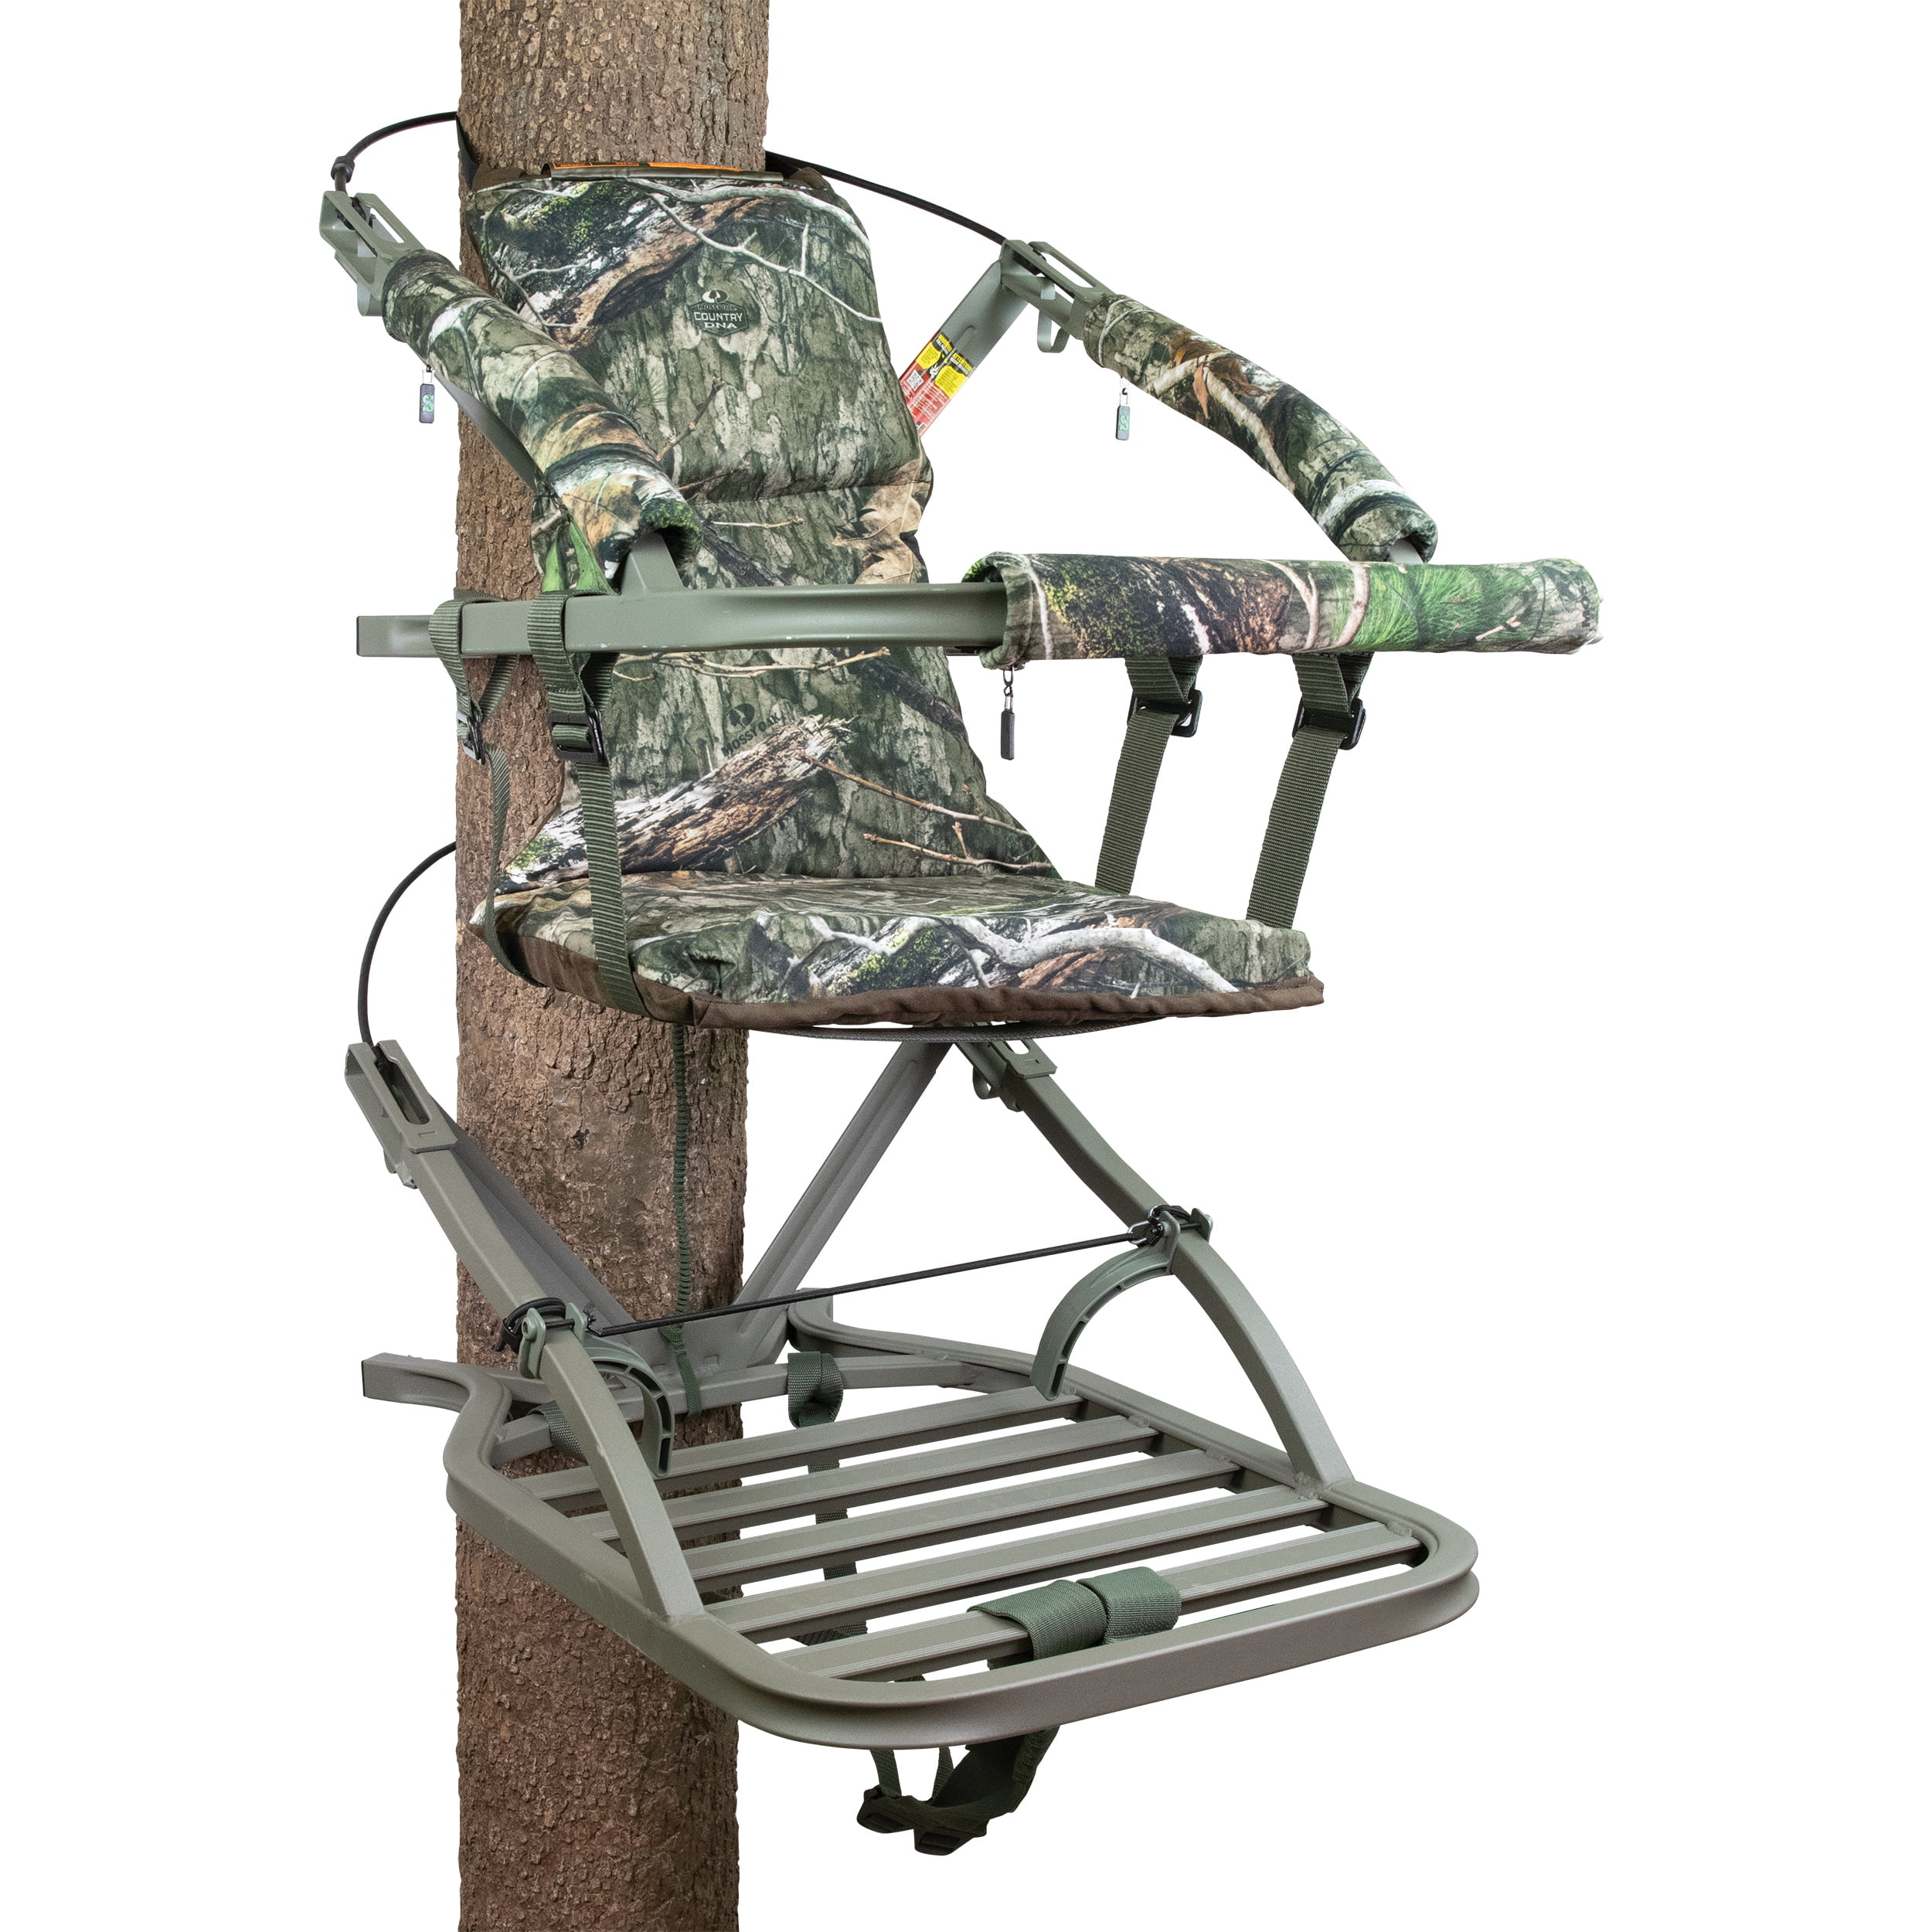 6 PACK ARCHERY TREESTAND Hunter 20 foot CAMO BOW GEAR PULL UP ROPES Hoist Gear 